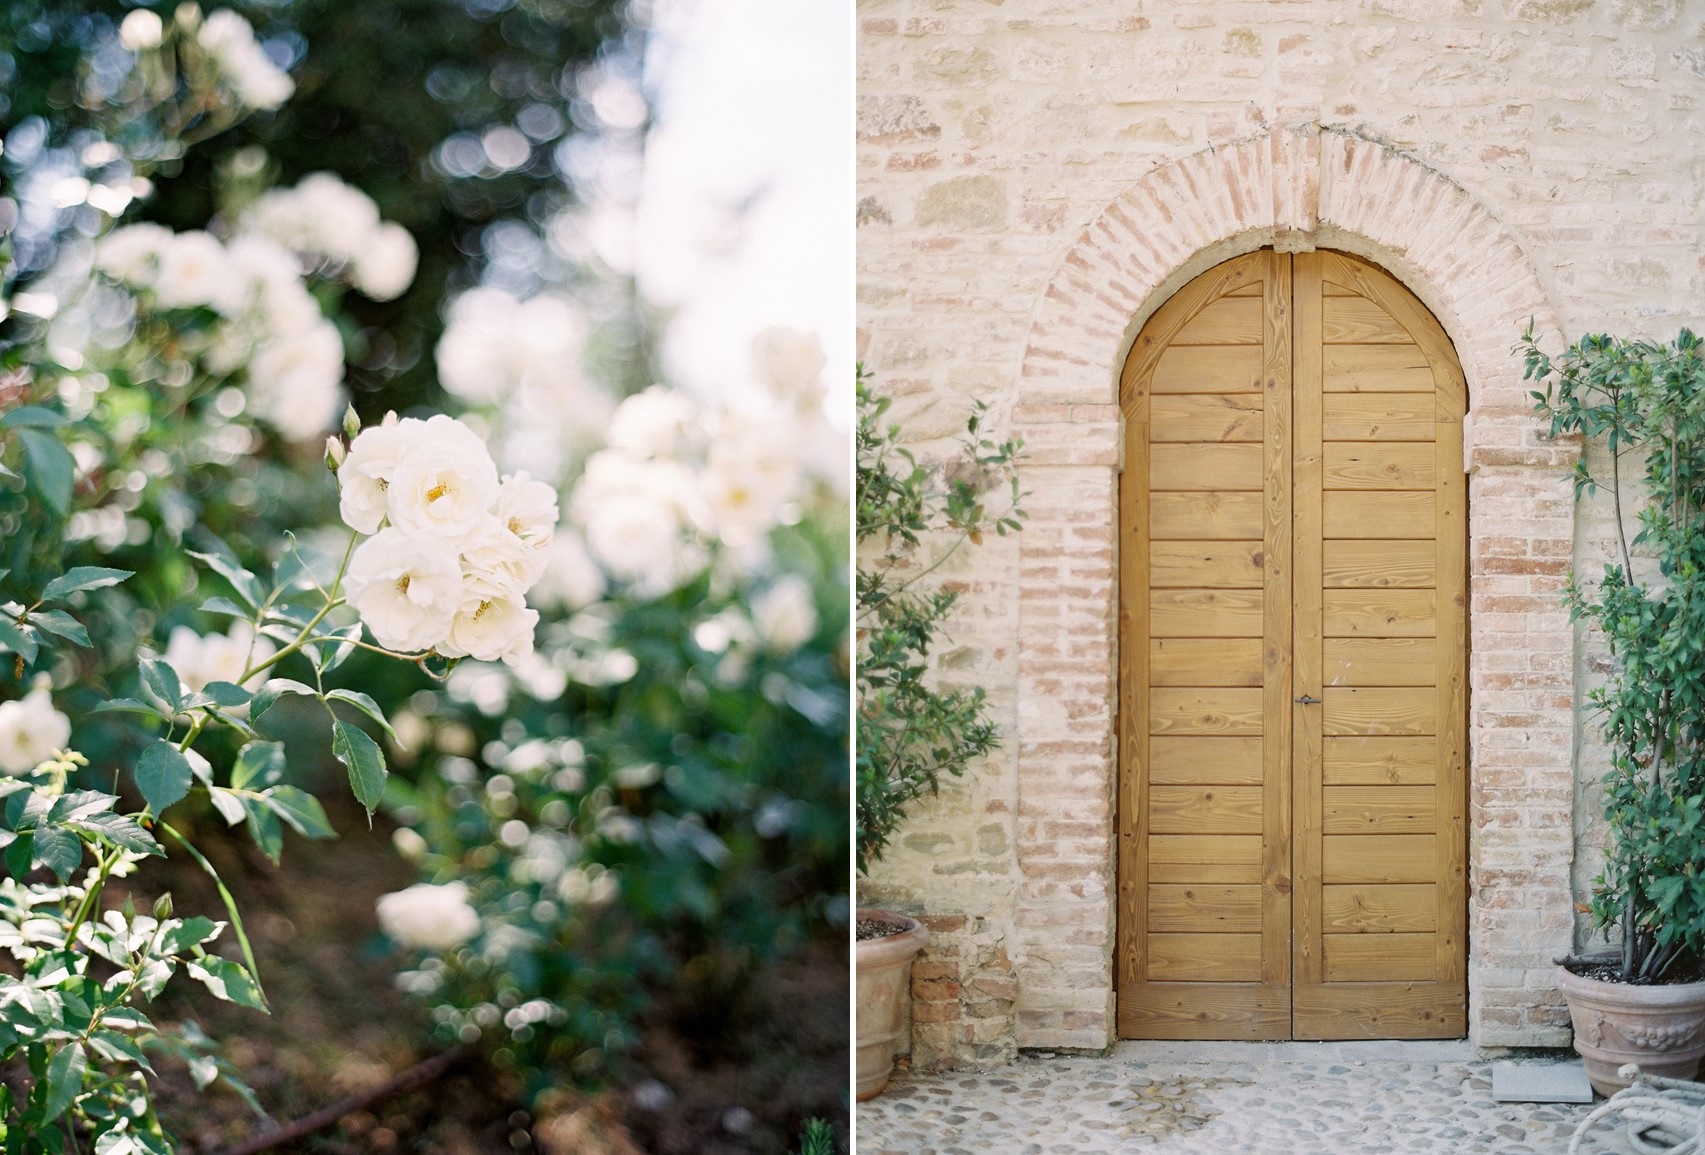 Timelessly Romantic Wedding Inspiration at an Italian Castle